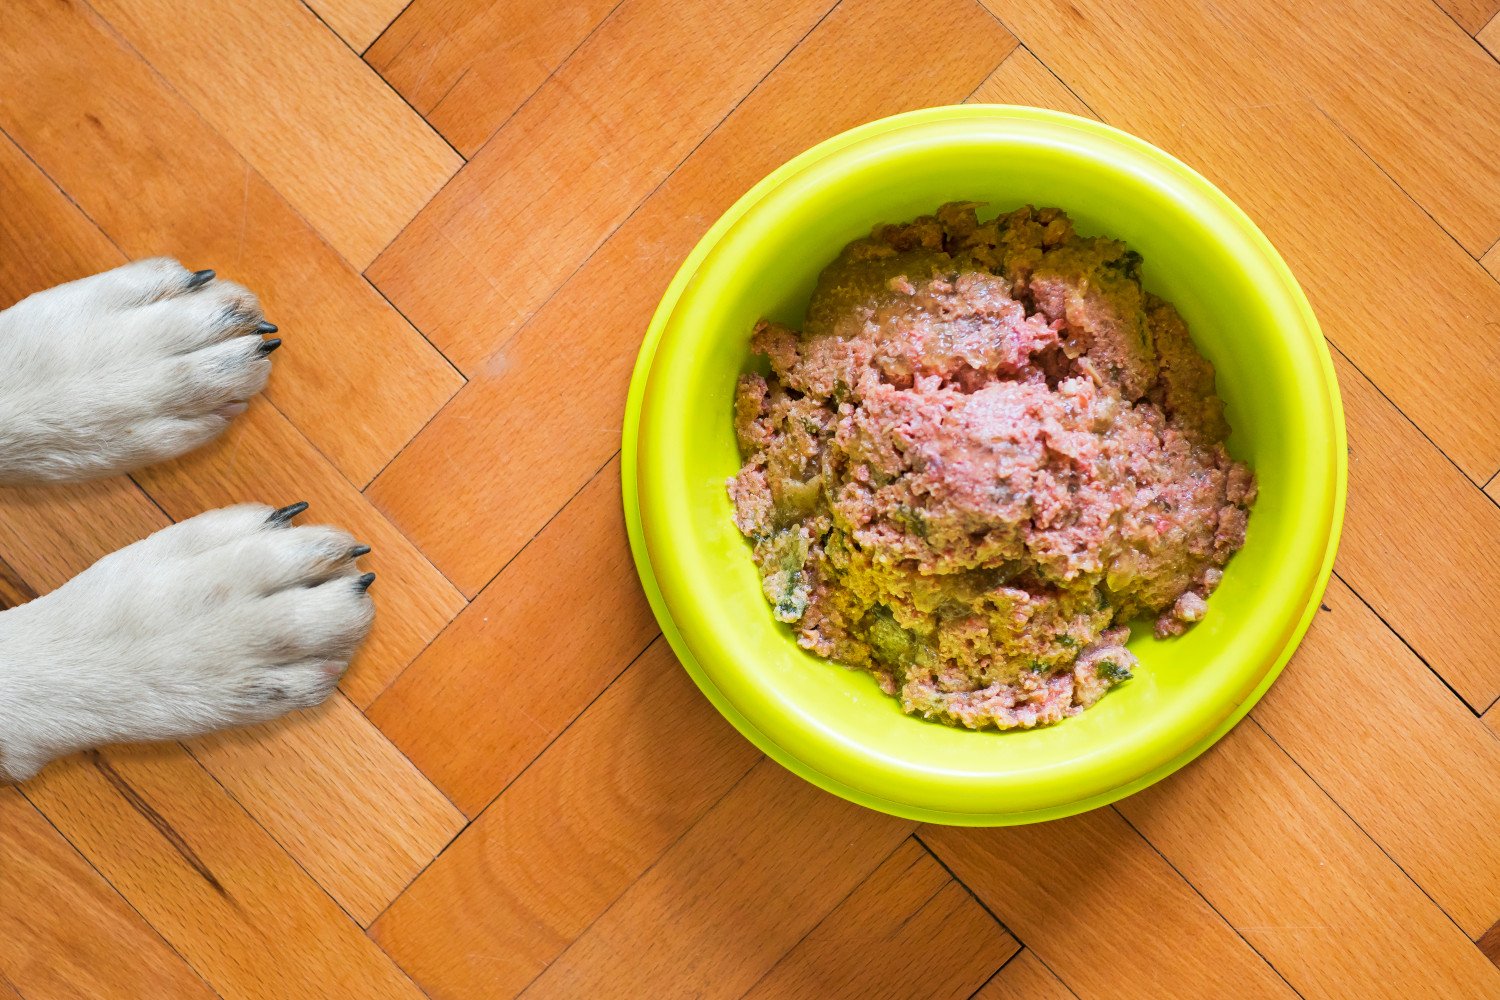 homemade dog food supplements